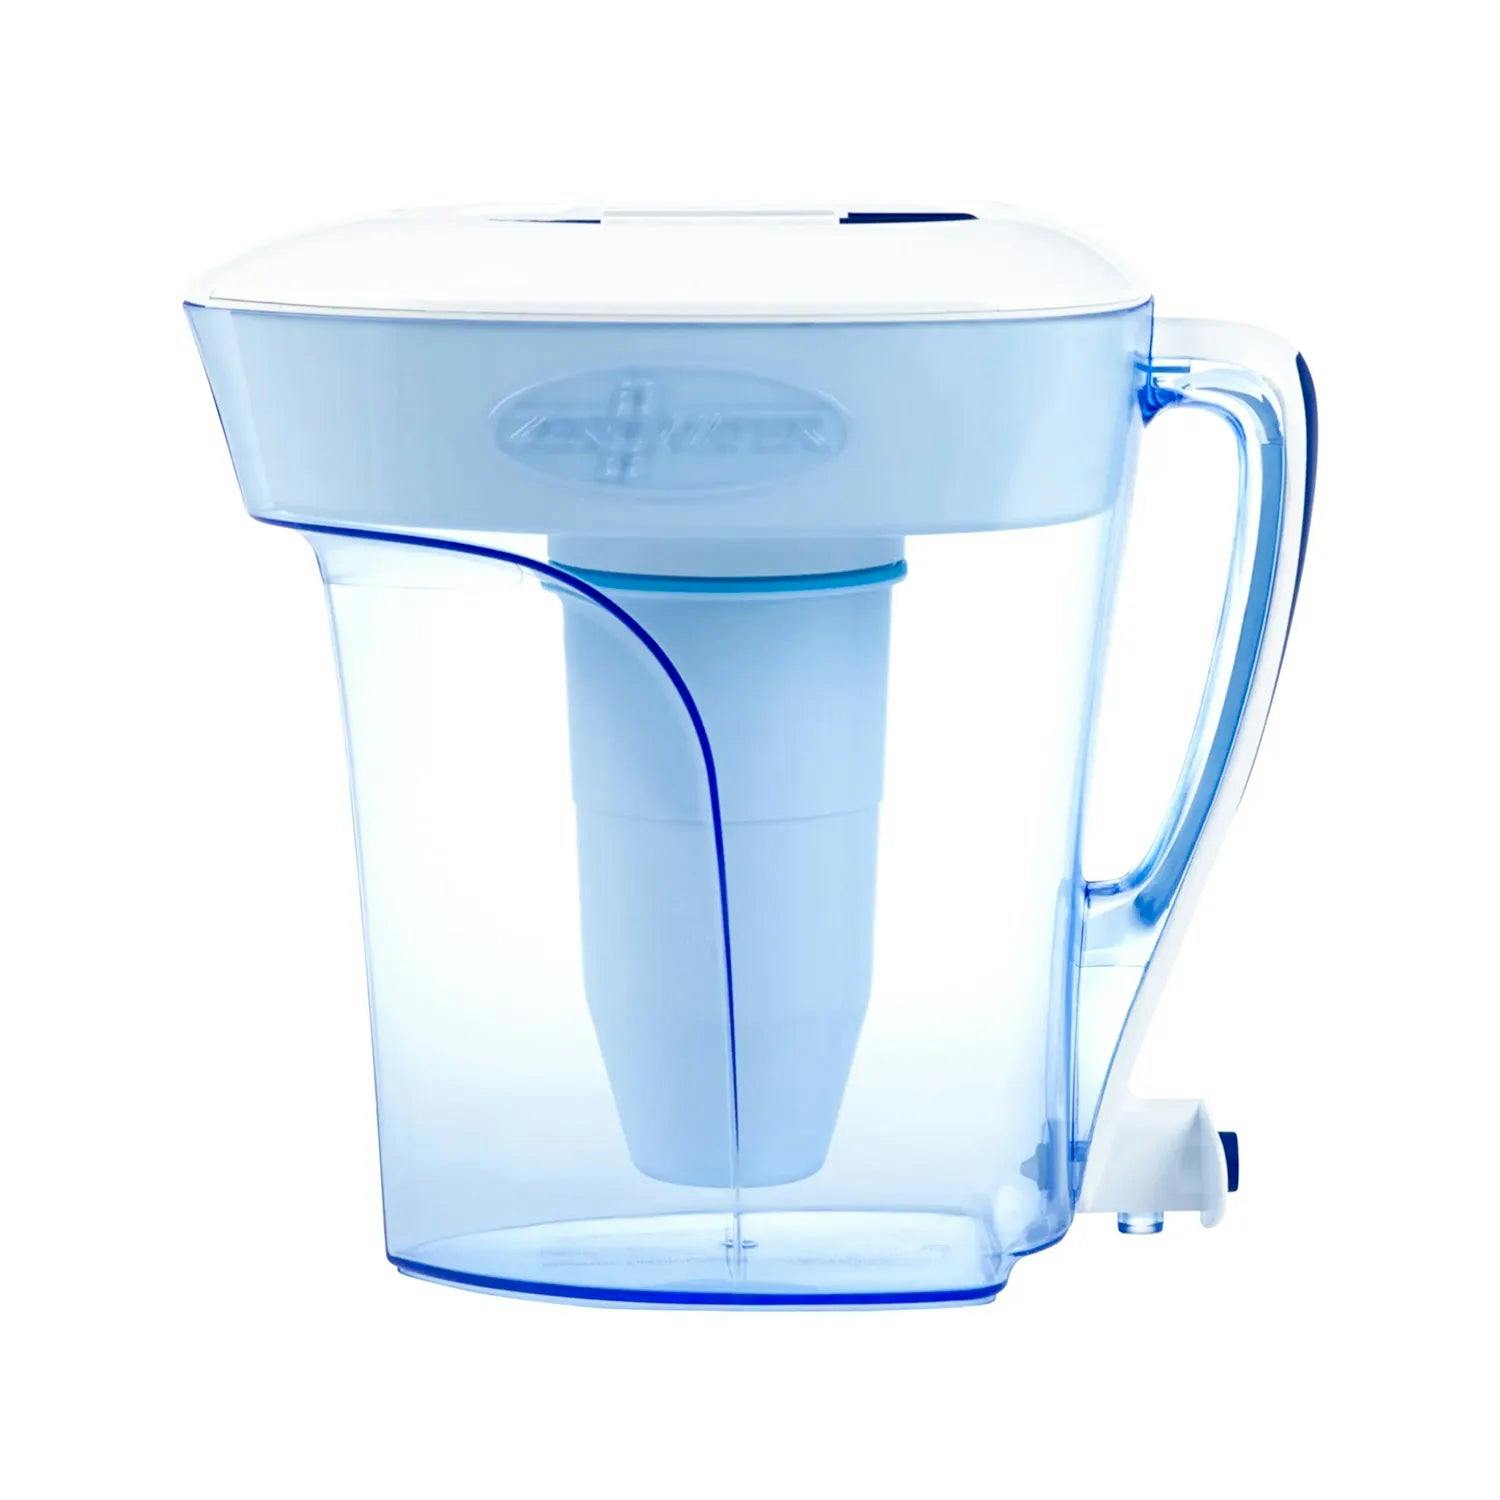 10 cup ready pour pitcher side view